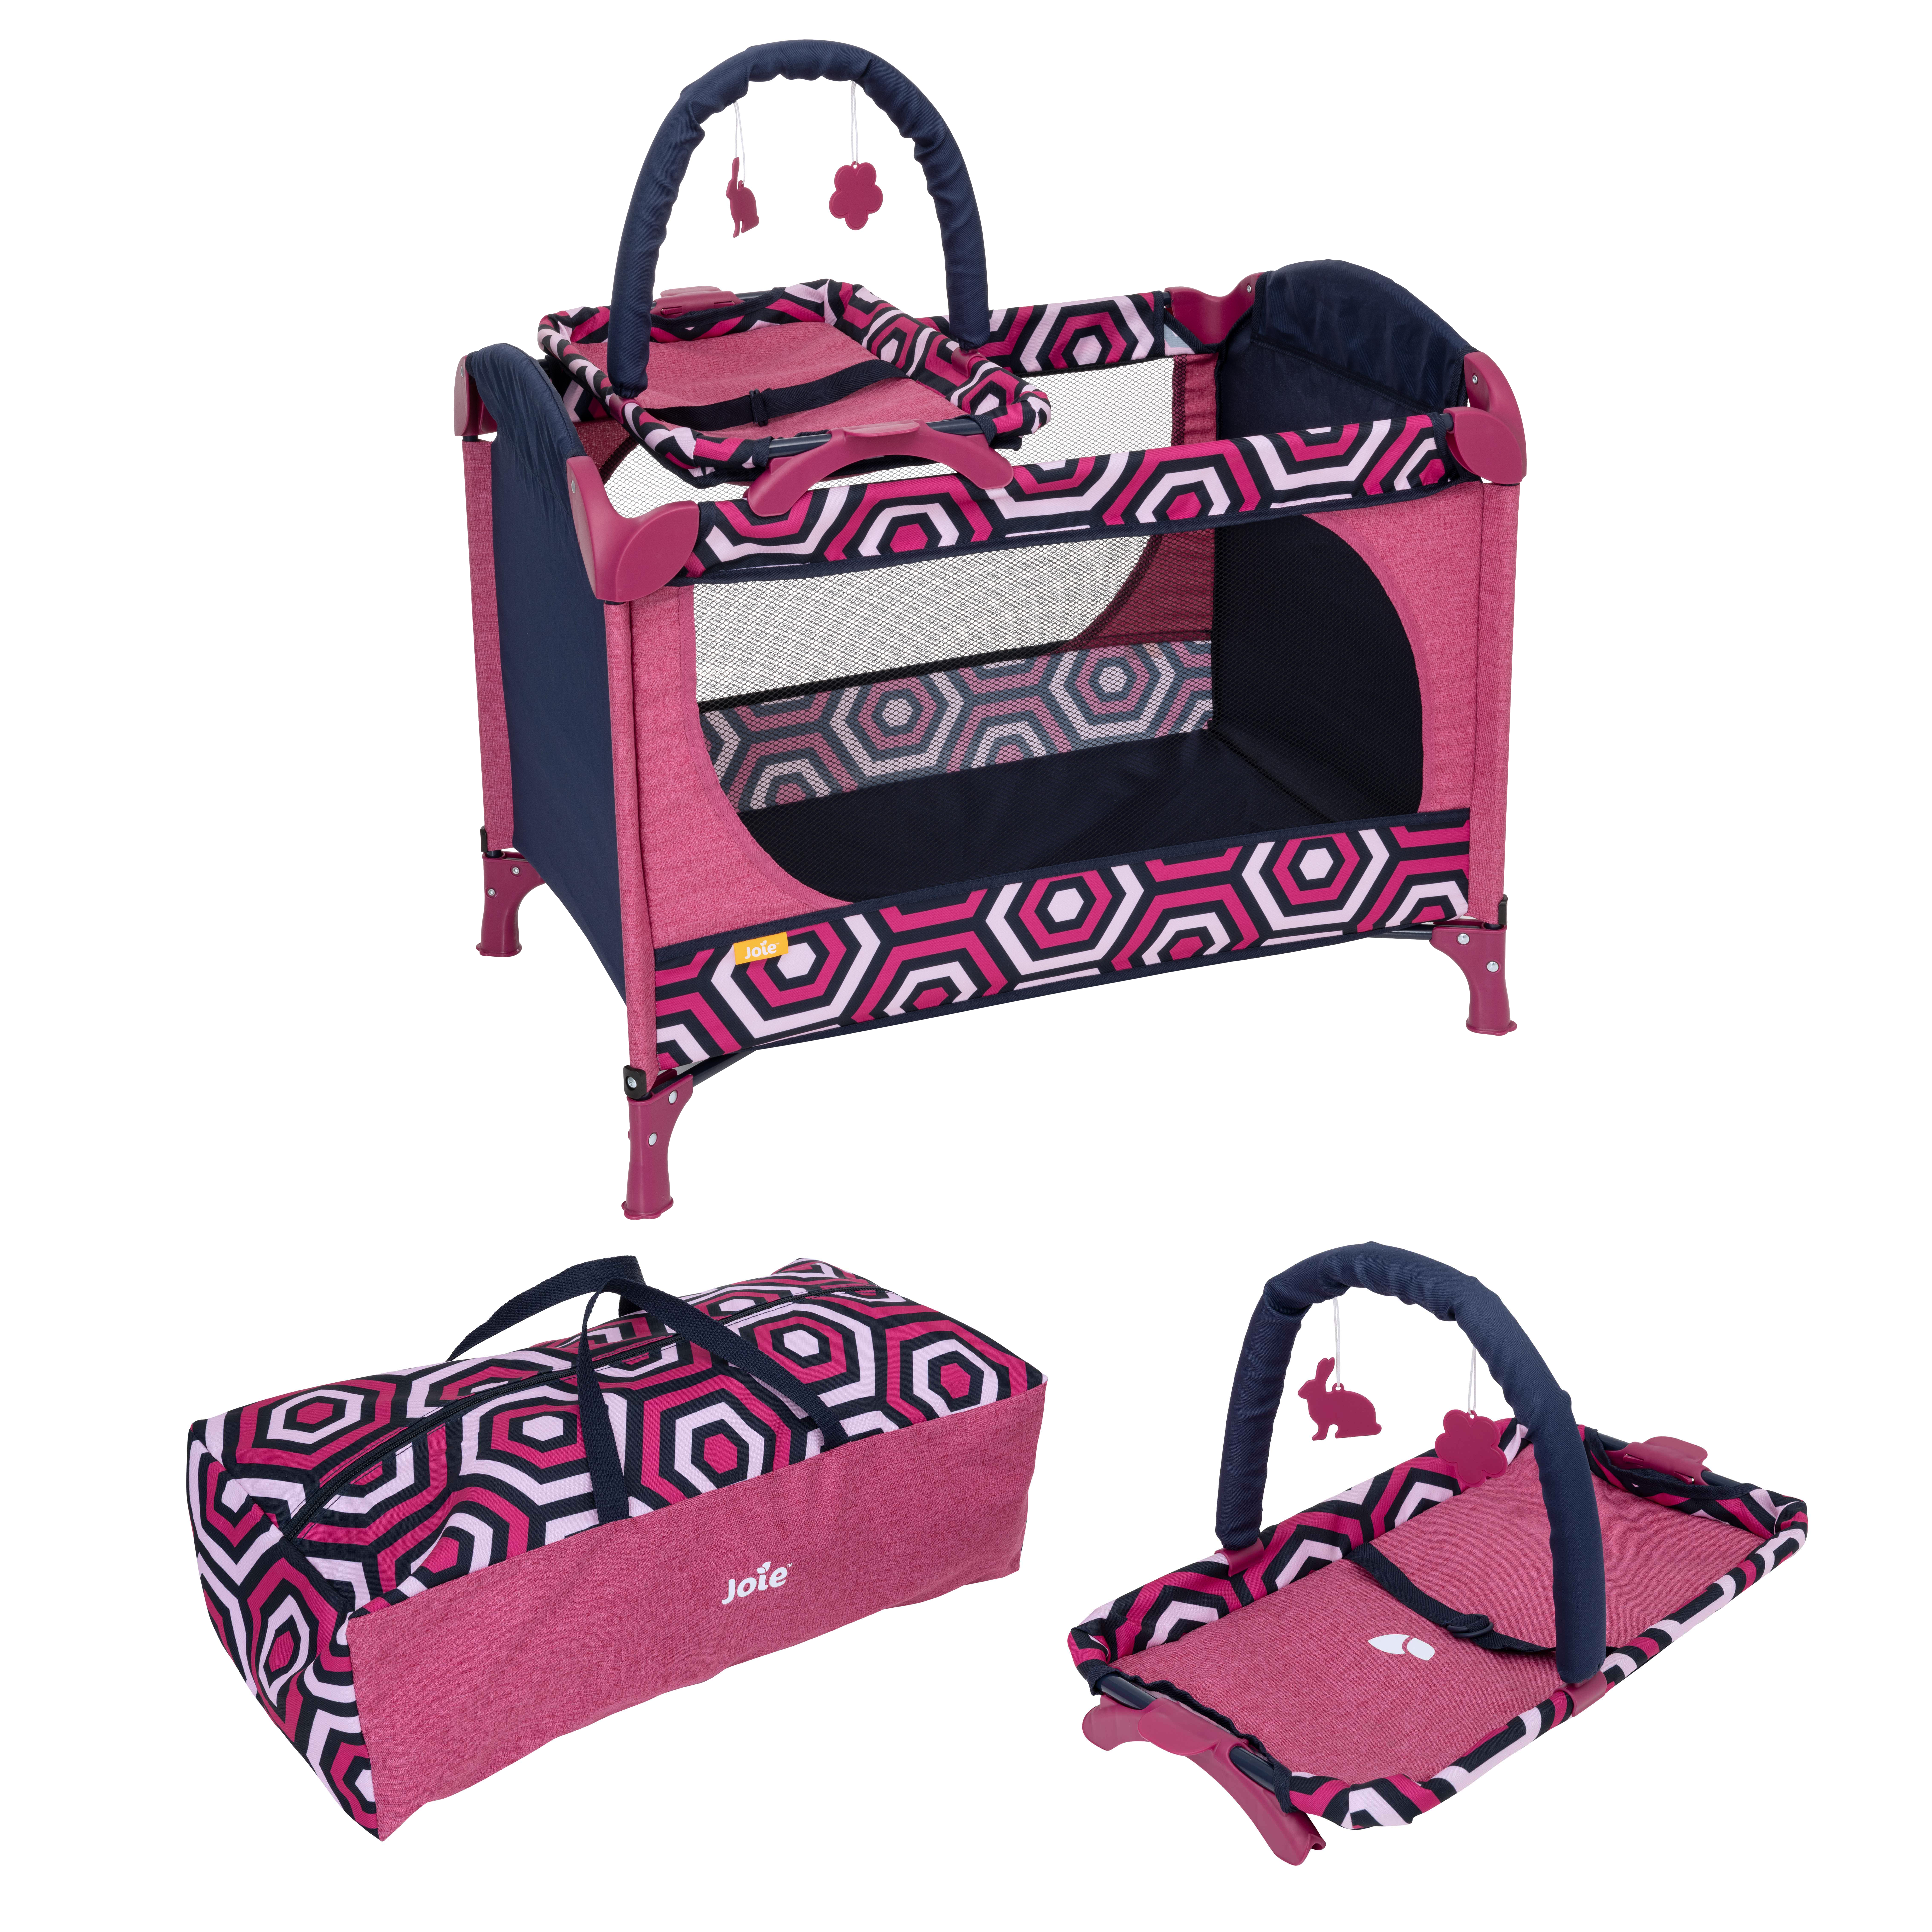 The Joie 3in1 Junior Doll Excursion Travel Cot (3 Years & Over) - Pink